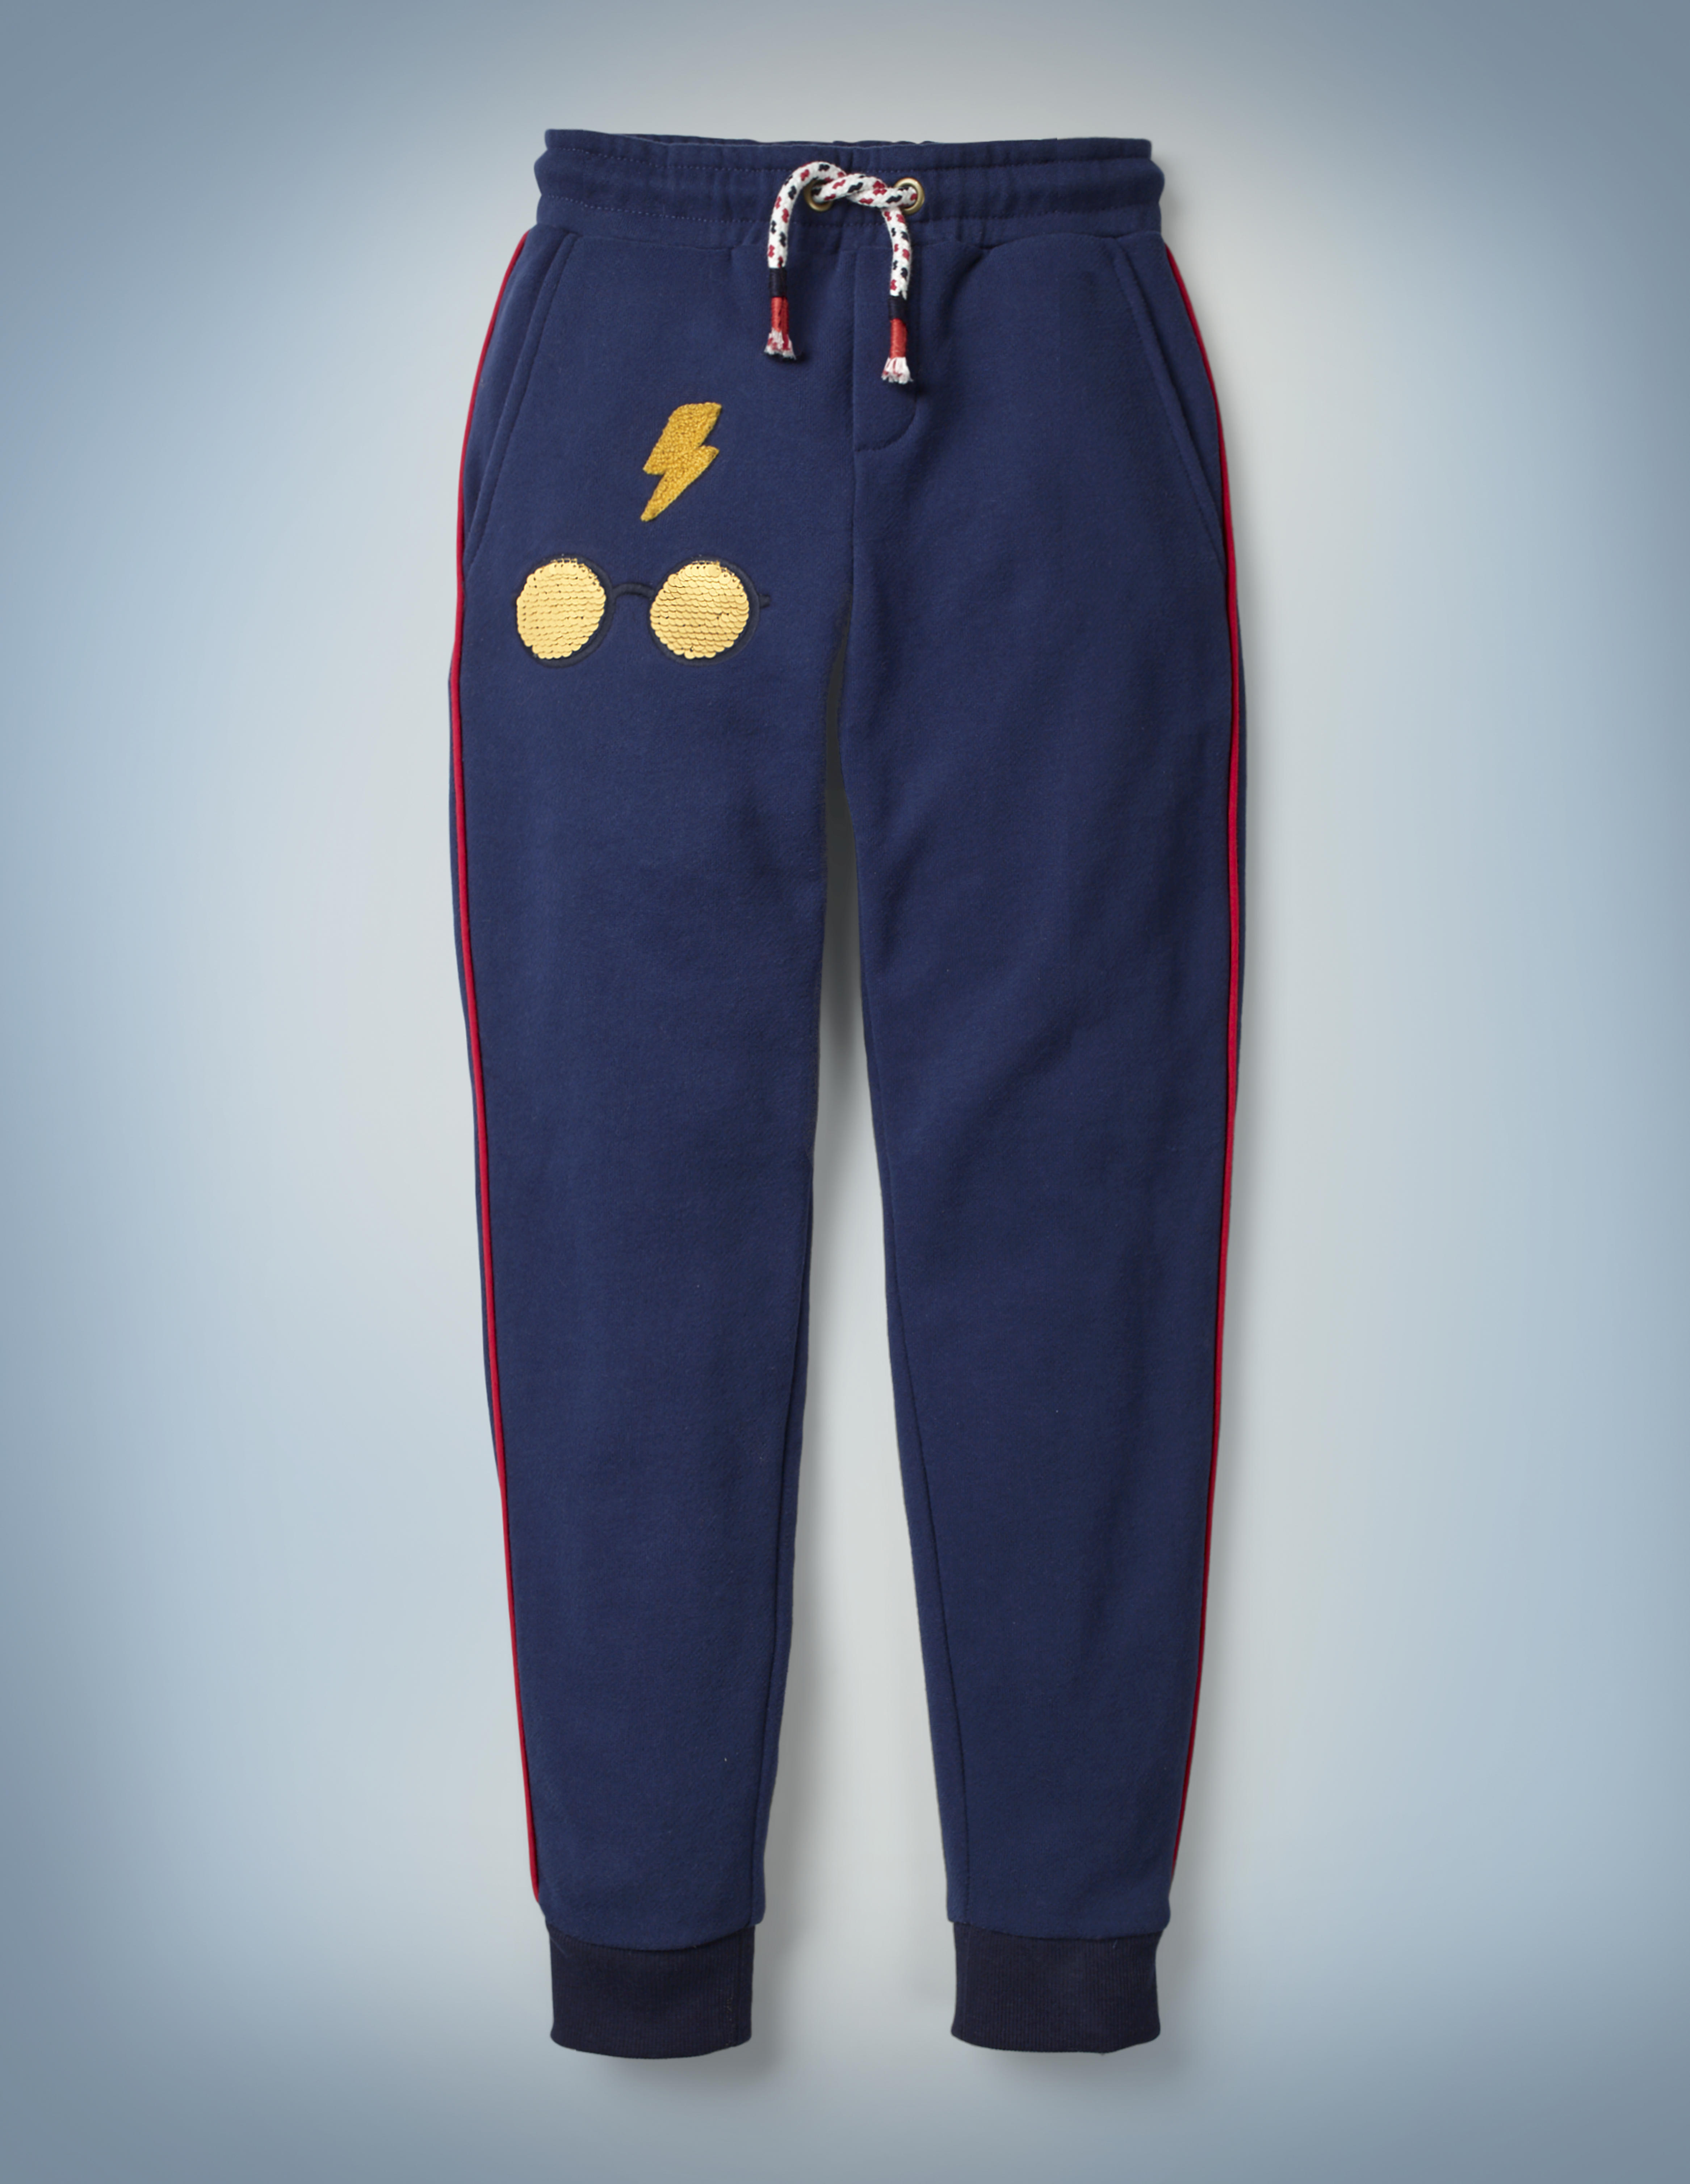 The Mini Boden Transfiguration Sequin Joggers in blue come with a drawstring waist and design featuring Harry Potter’s iconic glasses and lightning bolt scar. They retail at £26.